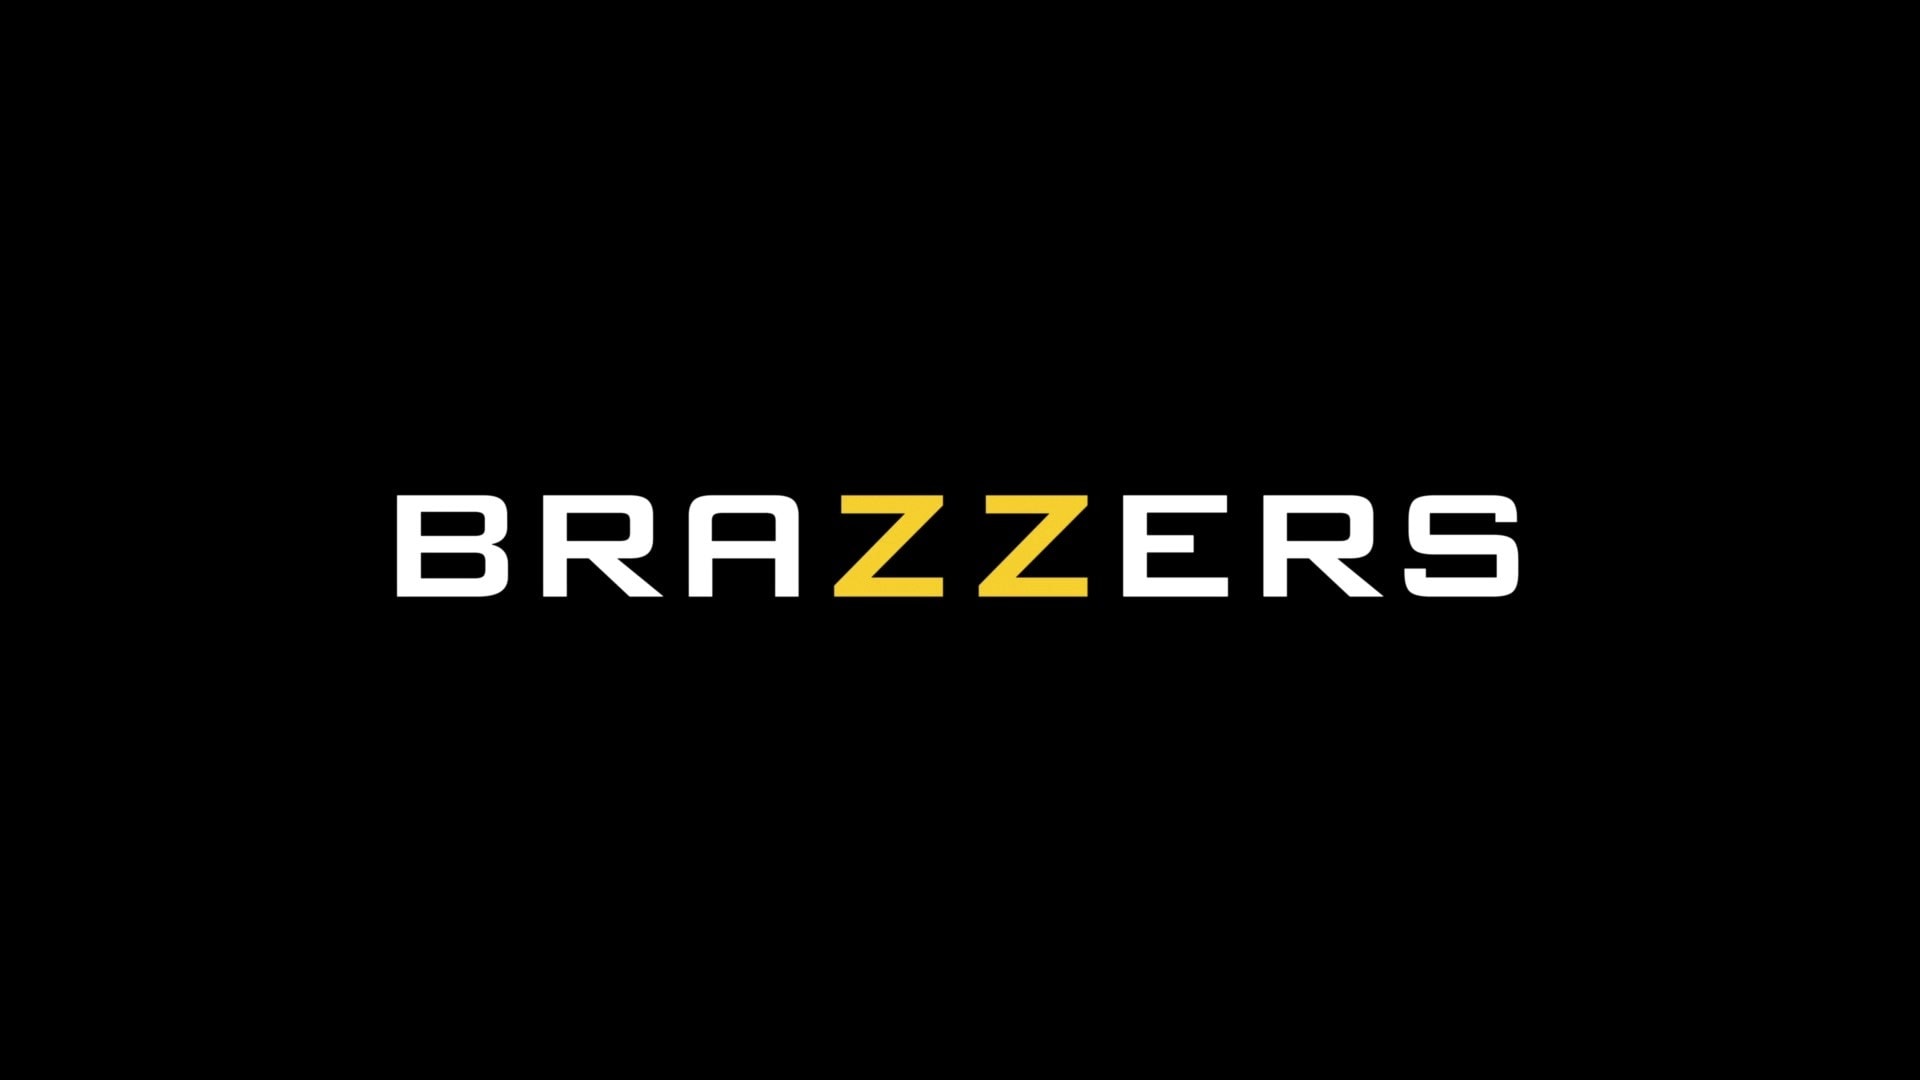 Brazzers 'The Plumber's Cumming' starring Jayla Page (Photo 2)